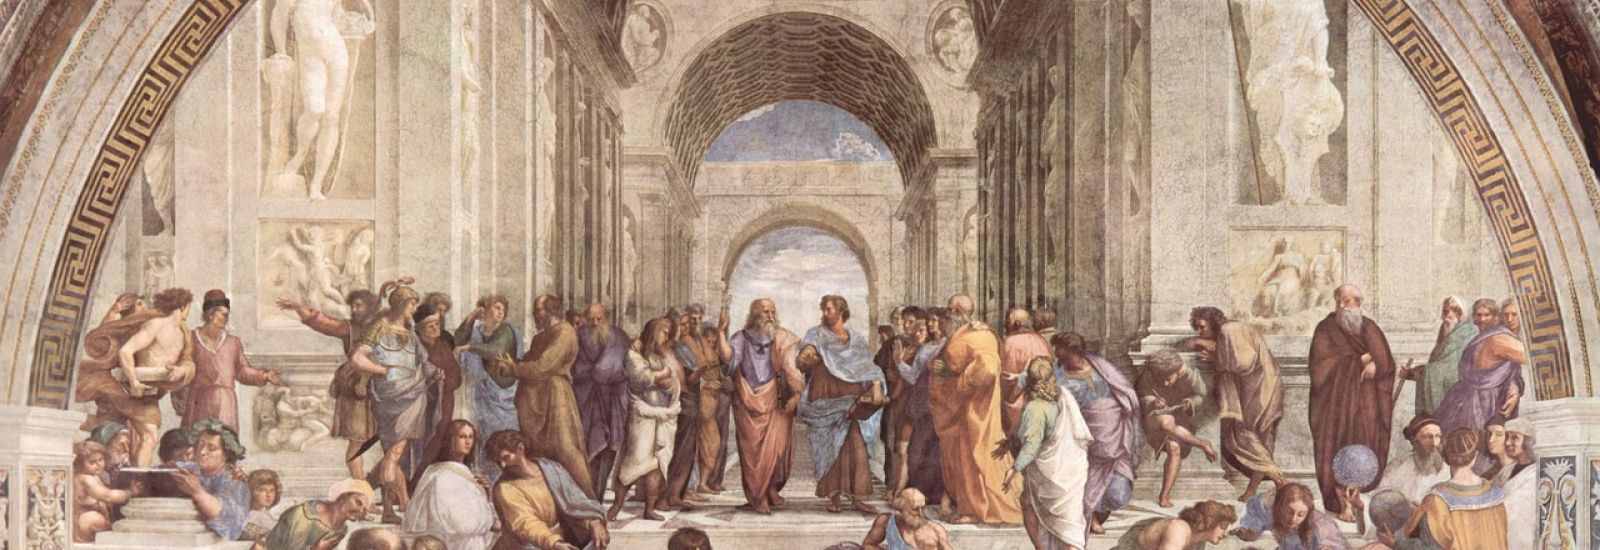 A medieval painting of Ancient Greek life, with men debating in a a grand stone building.